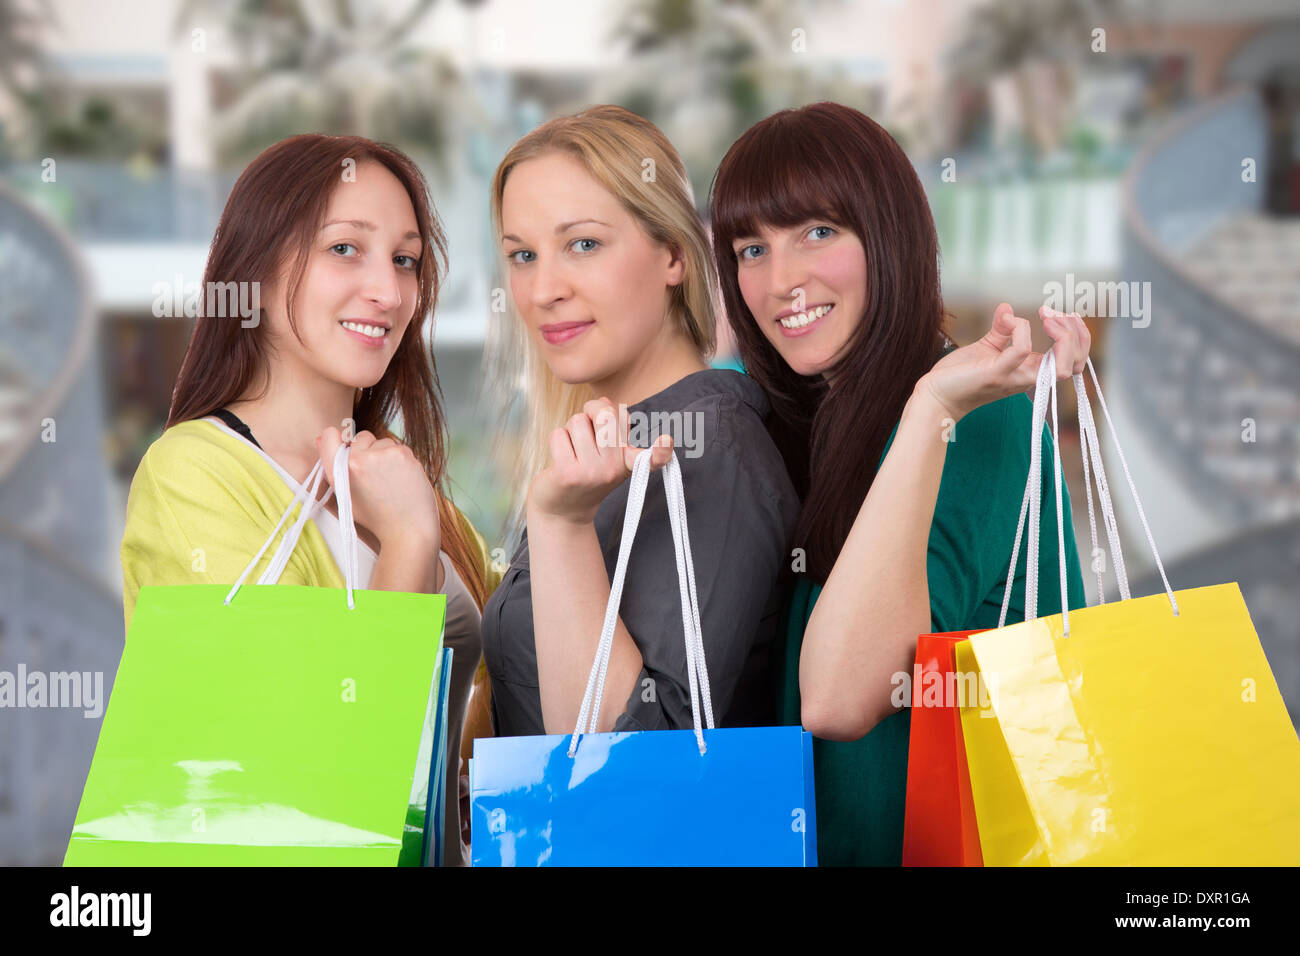 Group of smiling young women with shopping bags having fun while shopping in a shopping mall Stock Photo